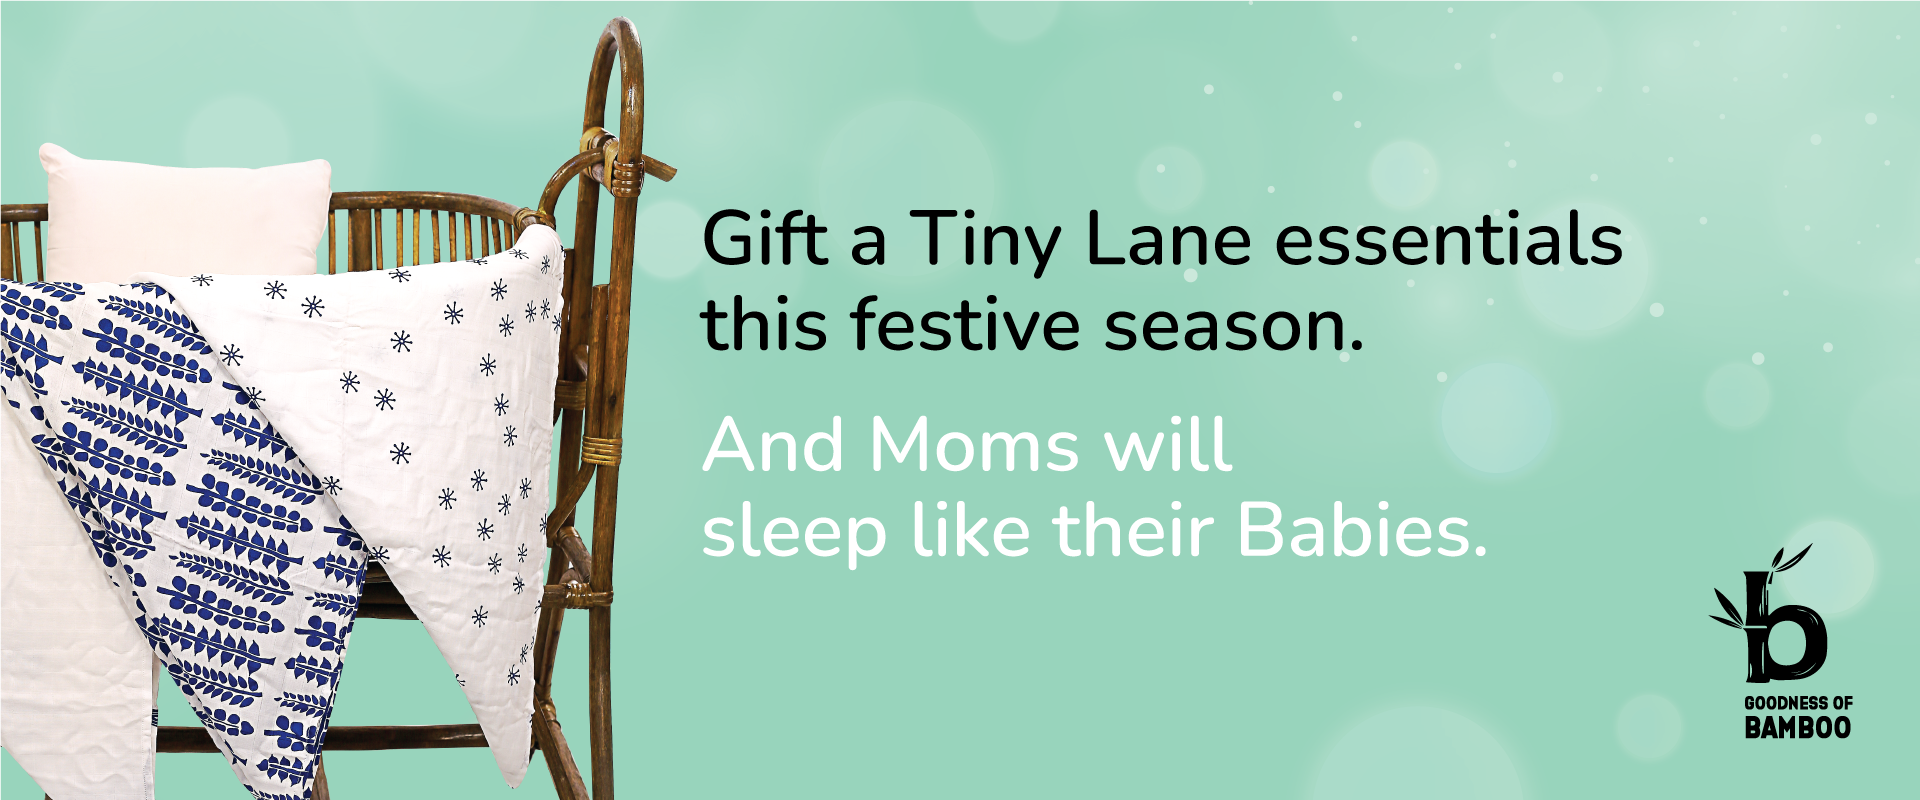 Gift a Tiny Lane essentials this festive season.  And Moms will sleep like their babies.